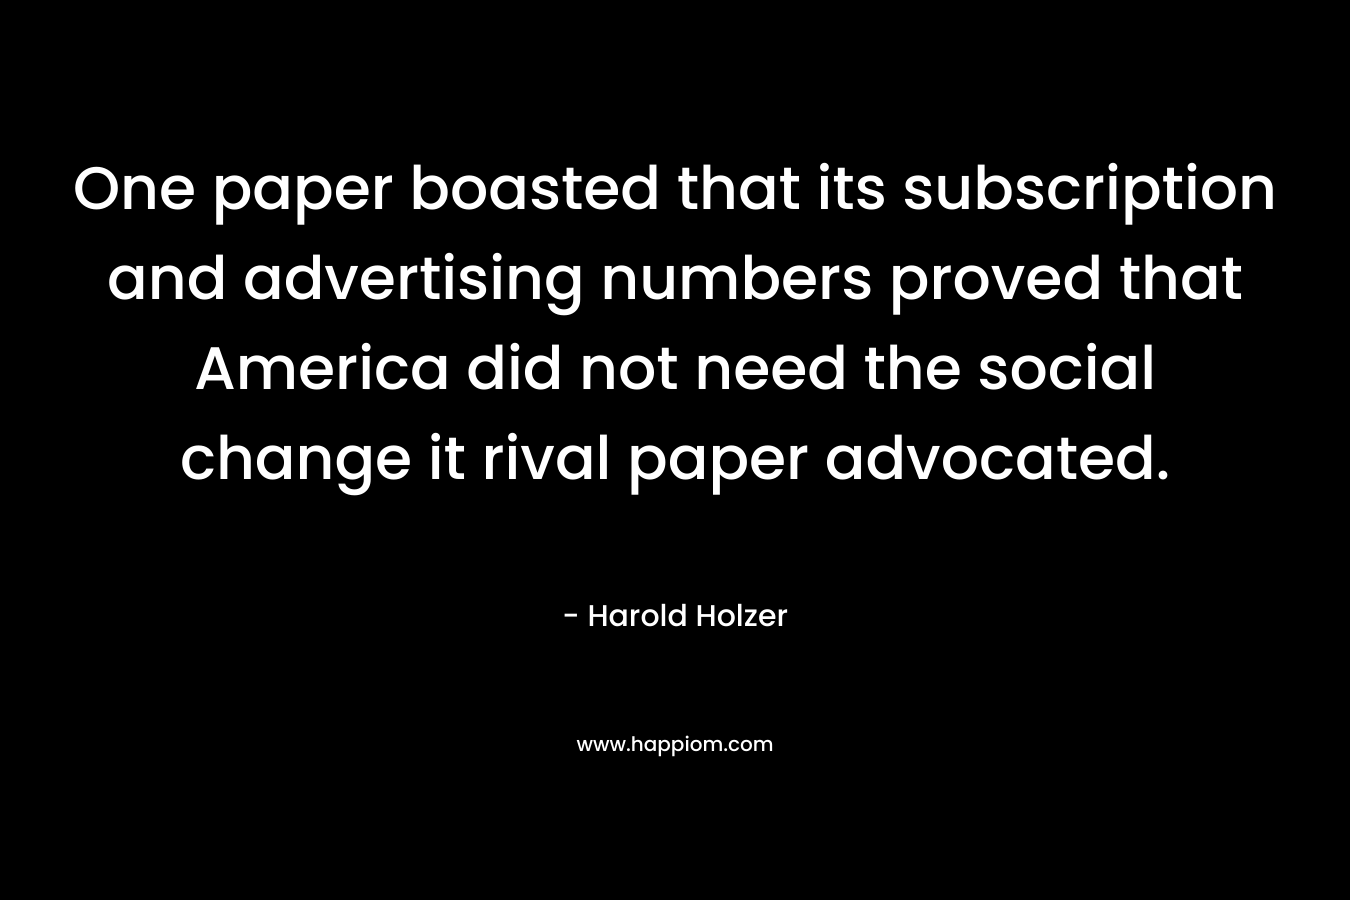 One paper boasted that its subscription and advertising numbers proved that America did not need the social change it rival paper advocated. – Harold Holzer